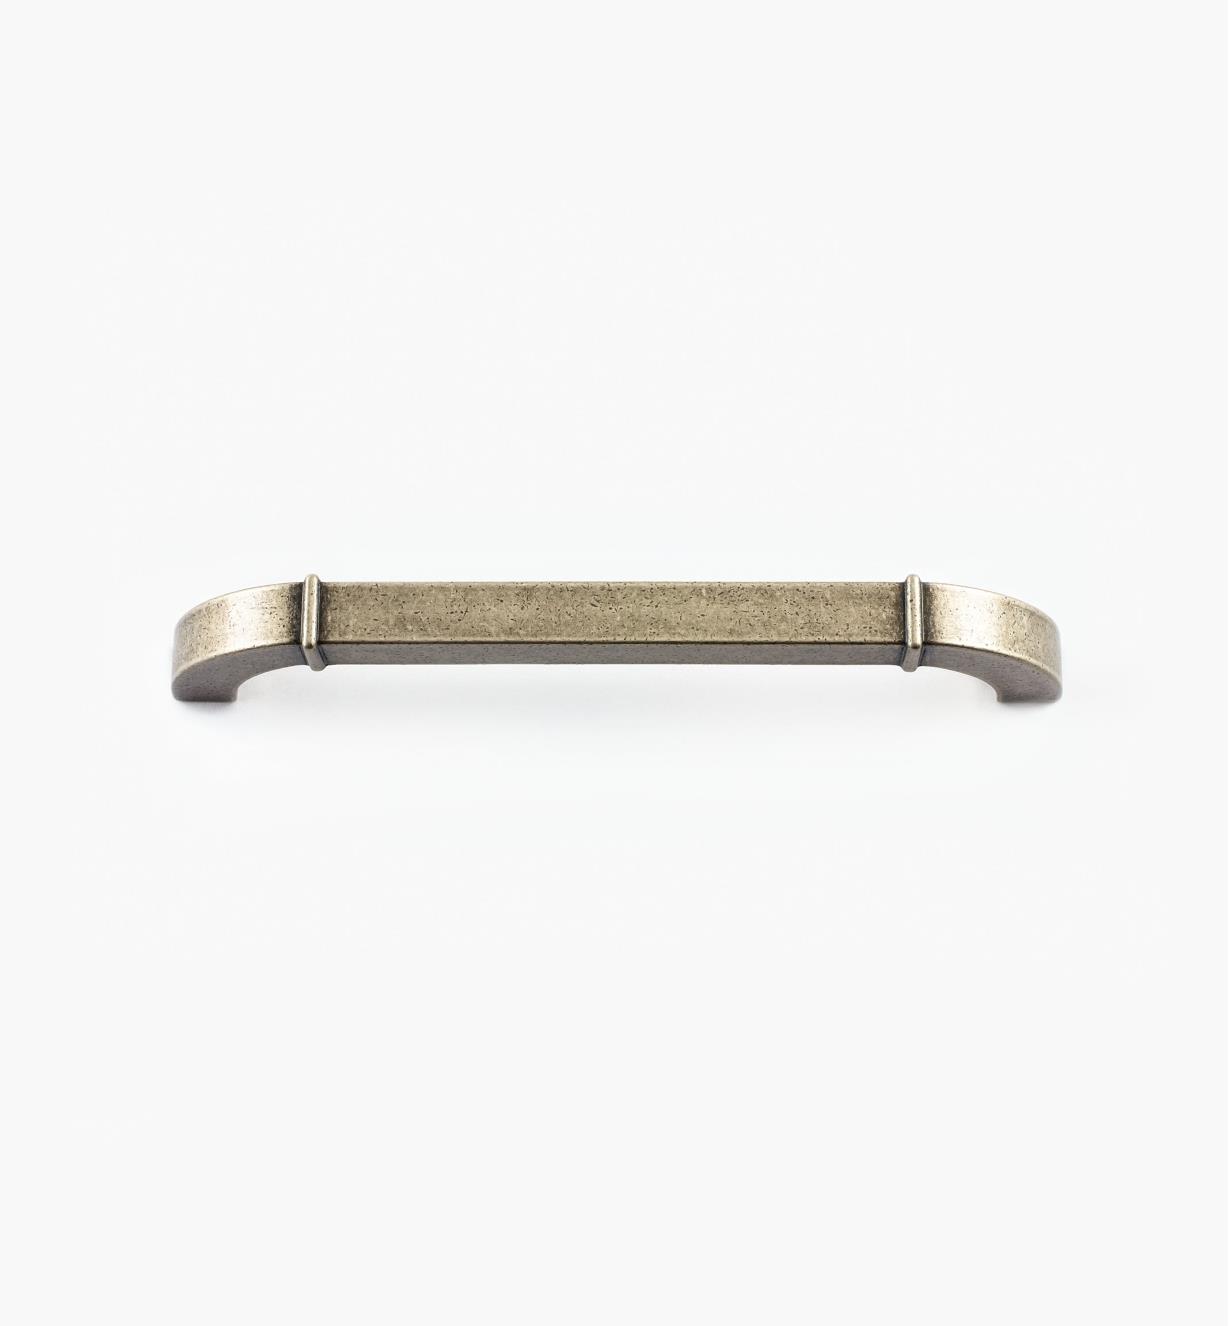 02A1530 - 128mm Antique Nickel Square Bow Handle